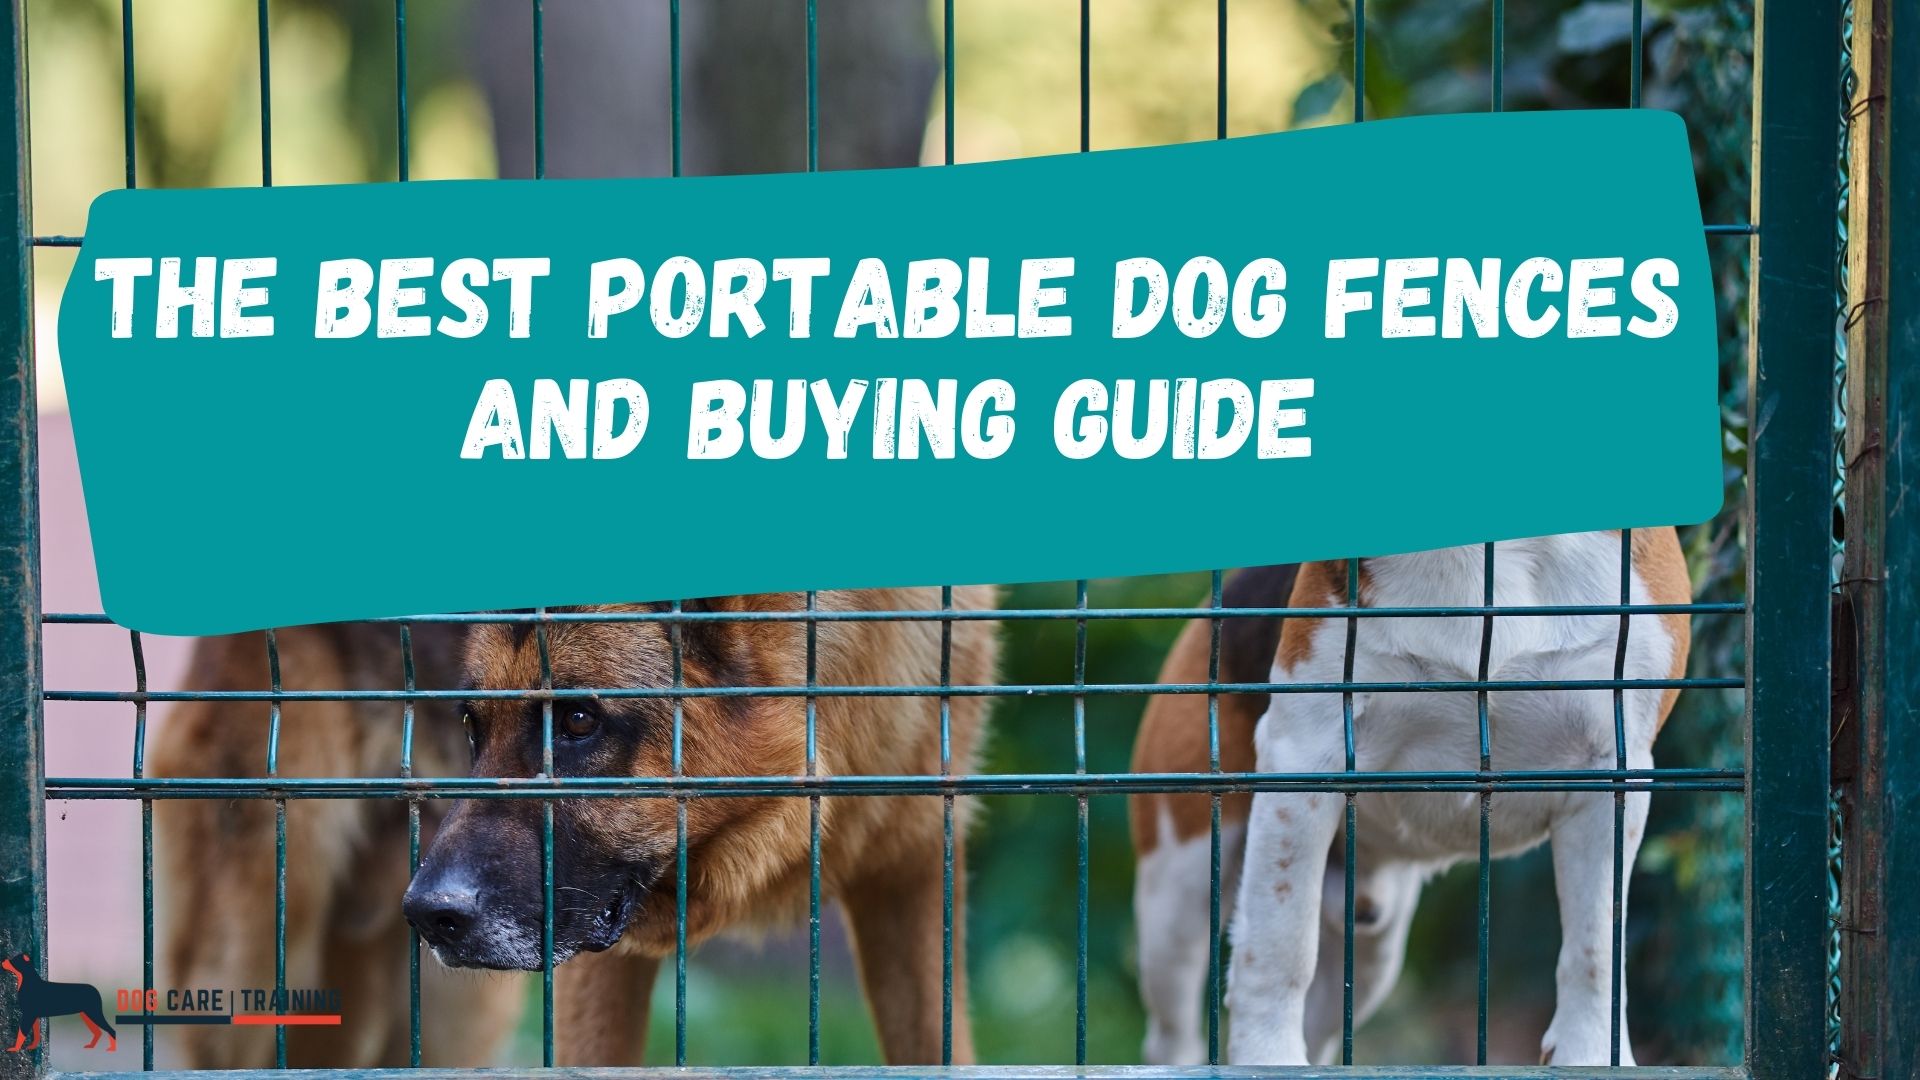 The Best Portable Dog Fences and Buying Guide